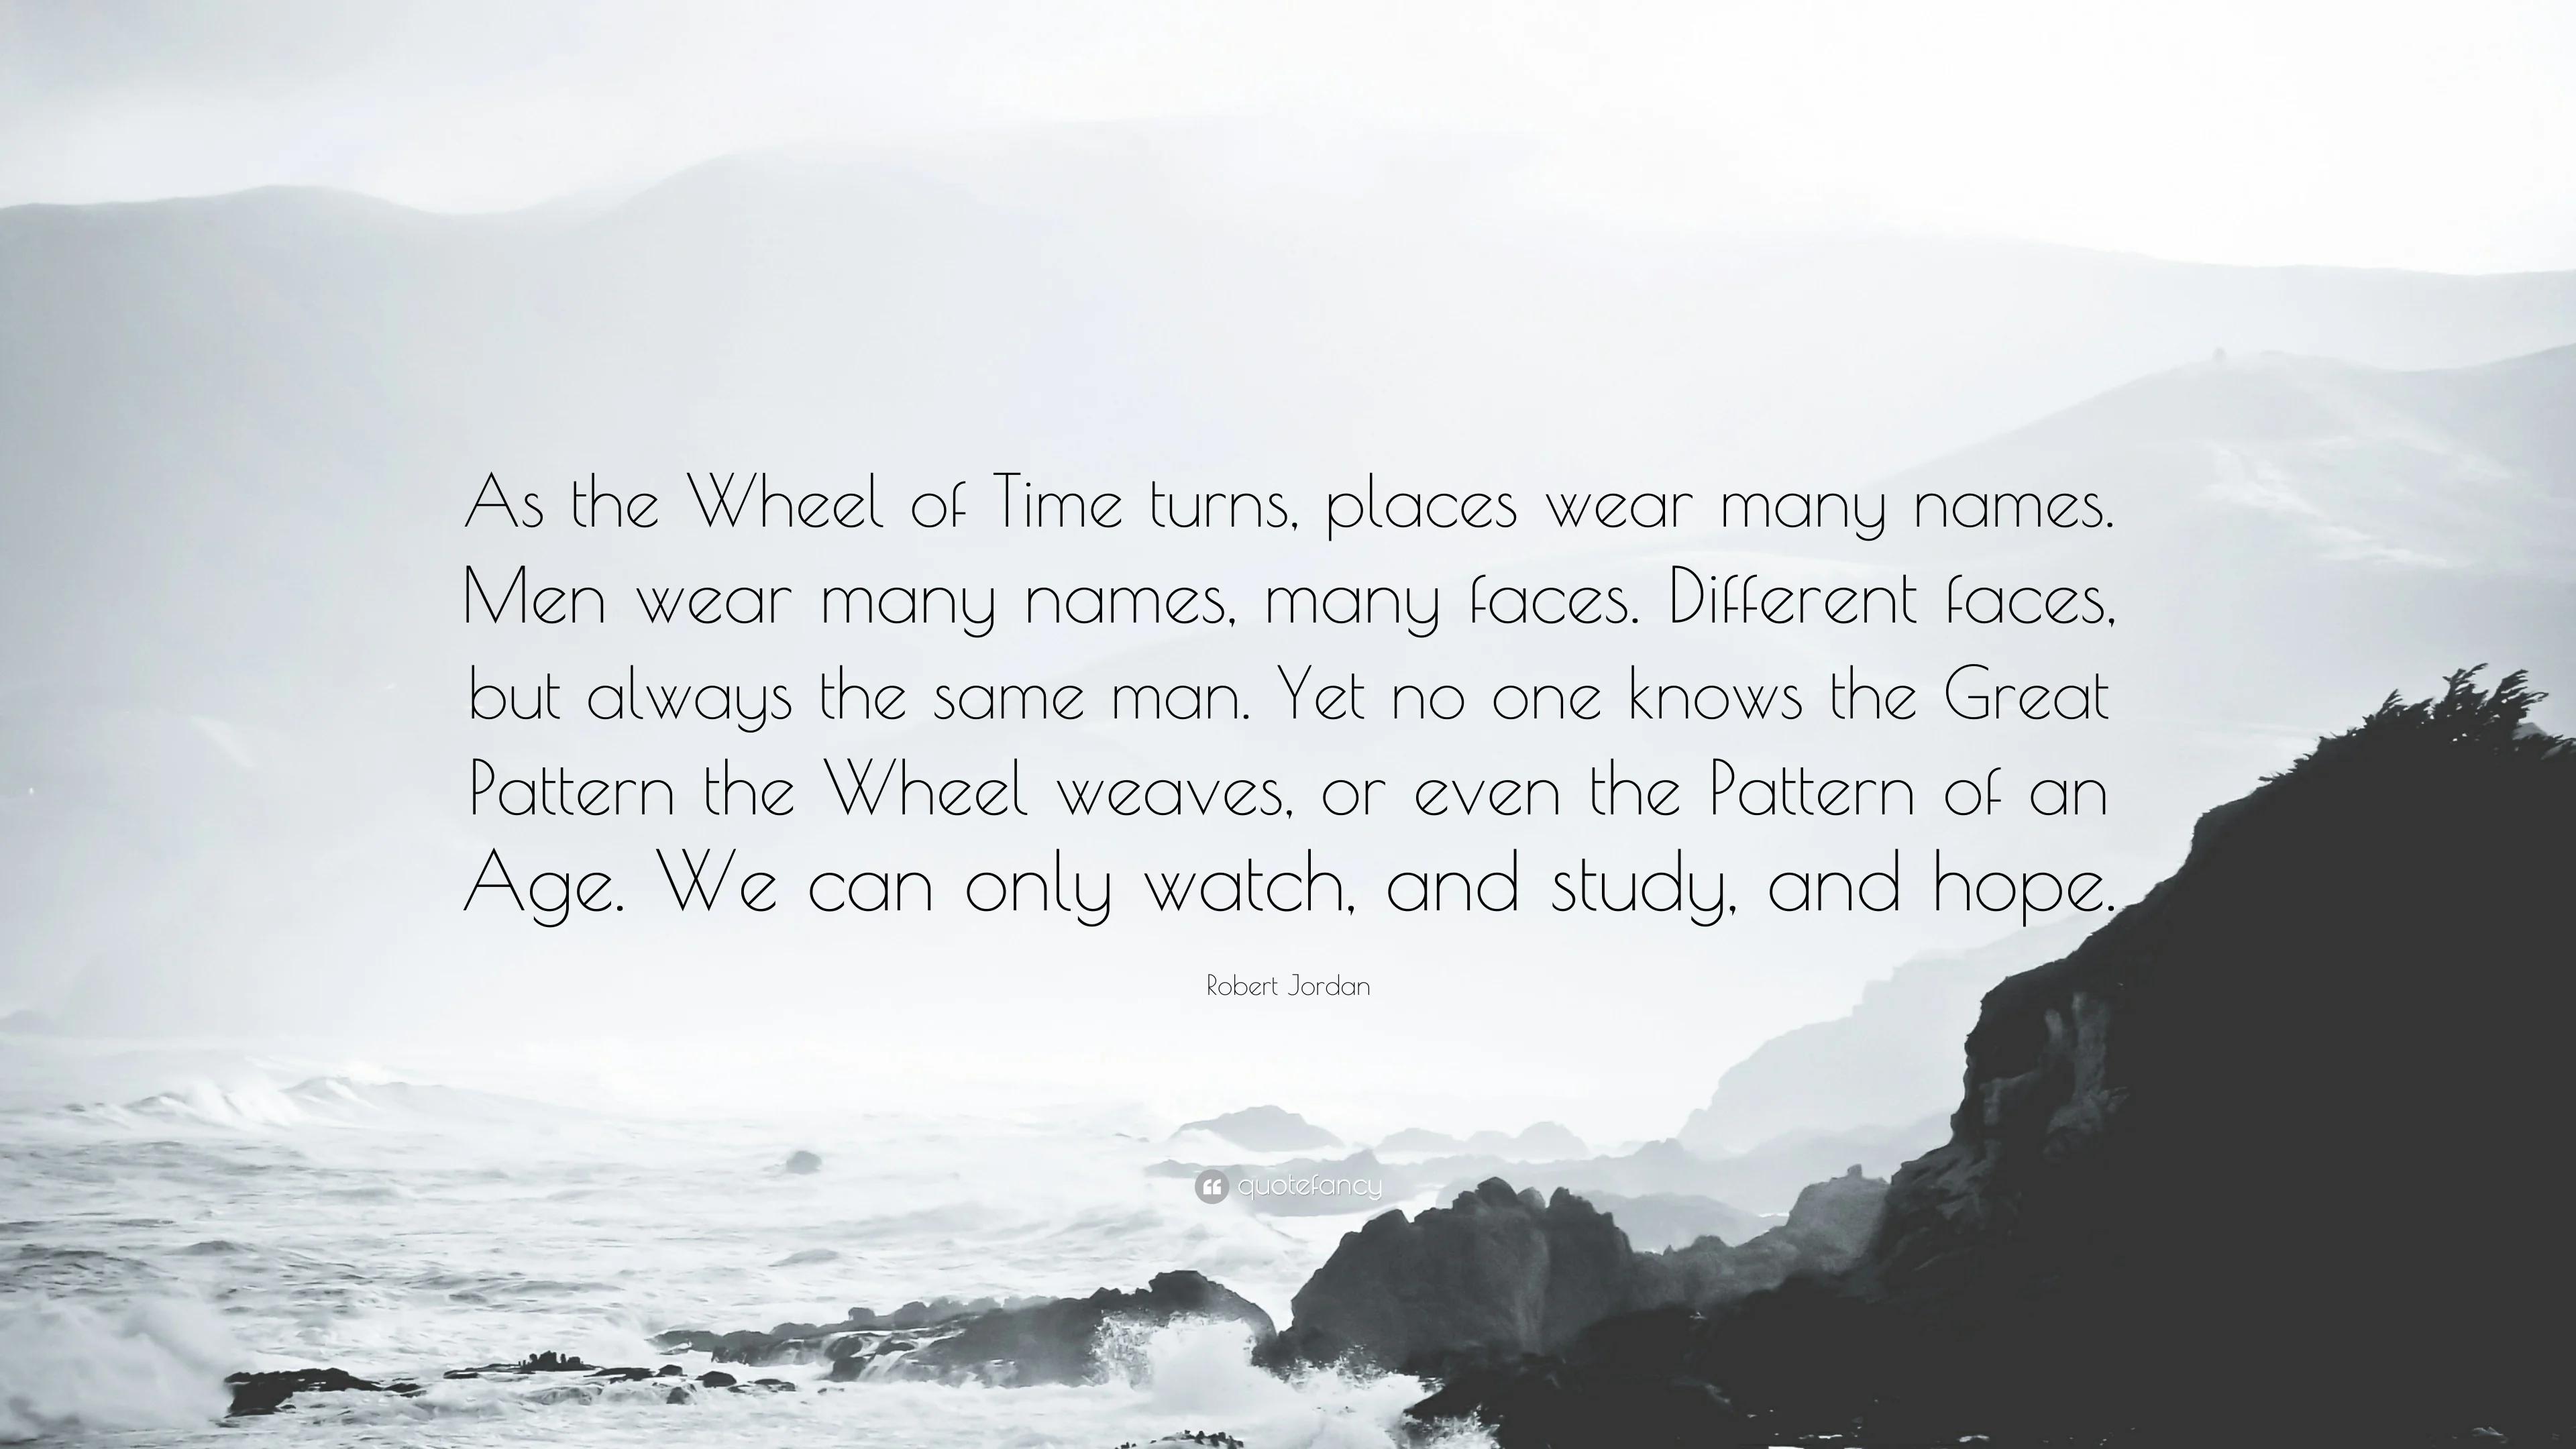 Robert Jordan Quote: “As the Wheel of Time turns, places wear many names